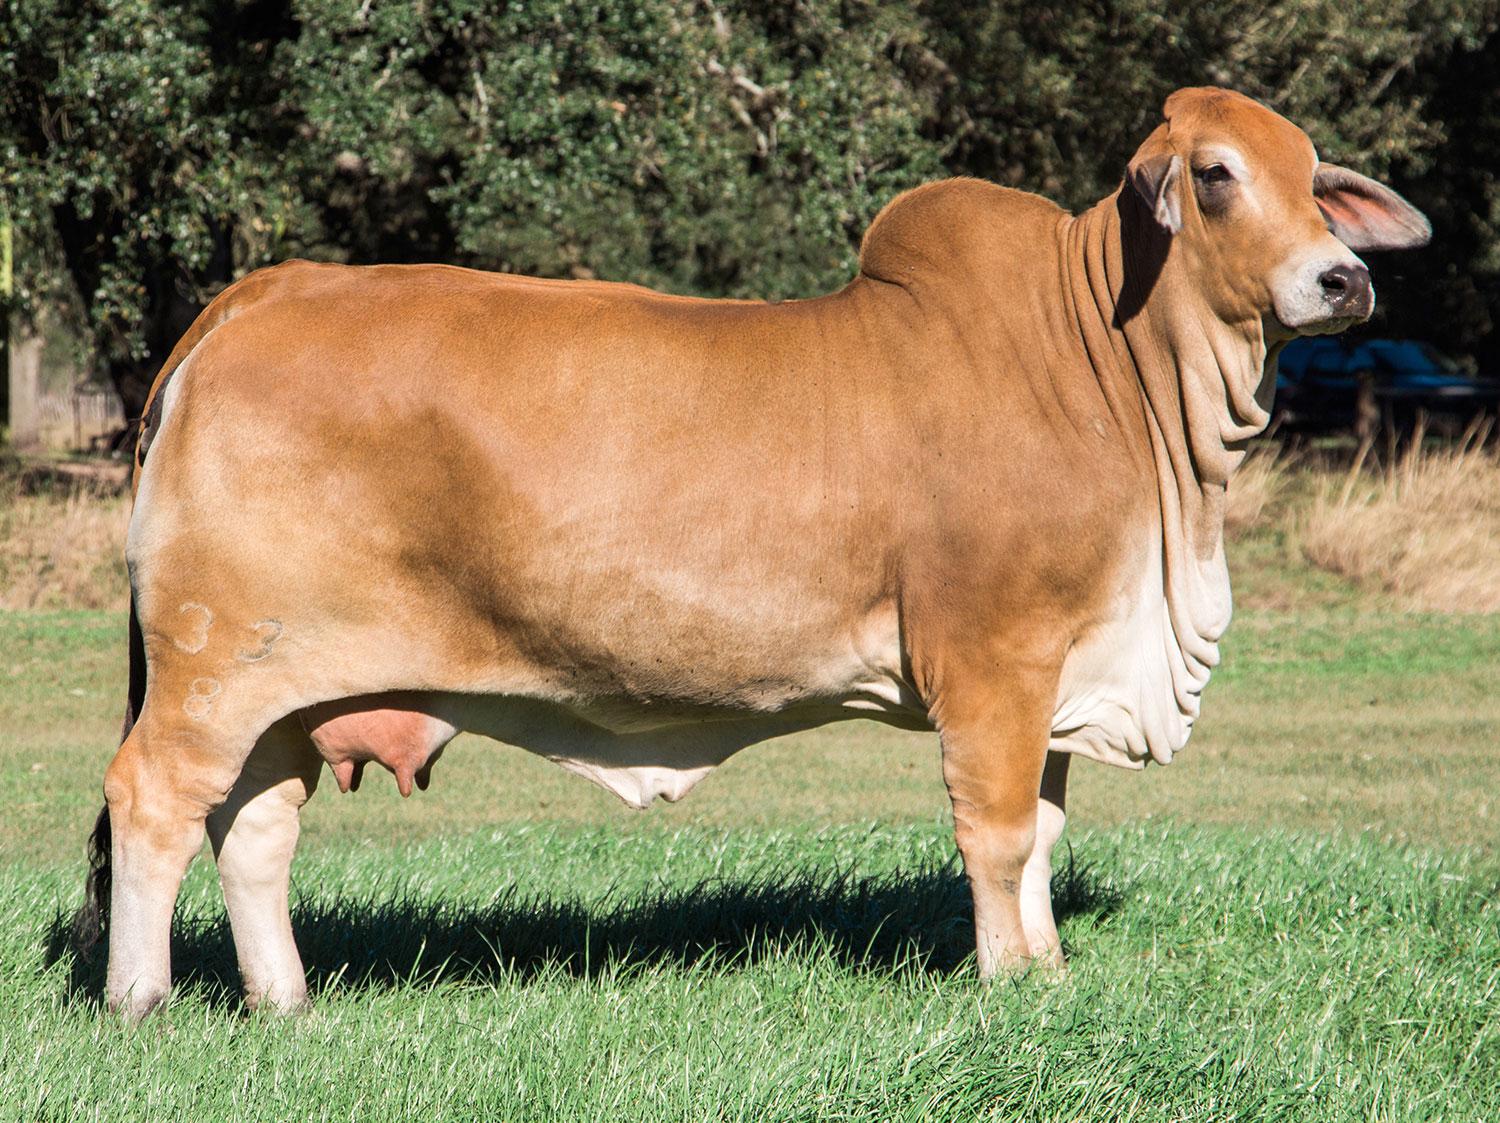 Miss V8 33/8 Donor Cow